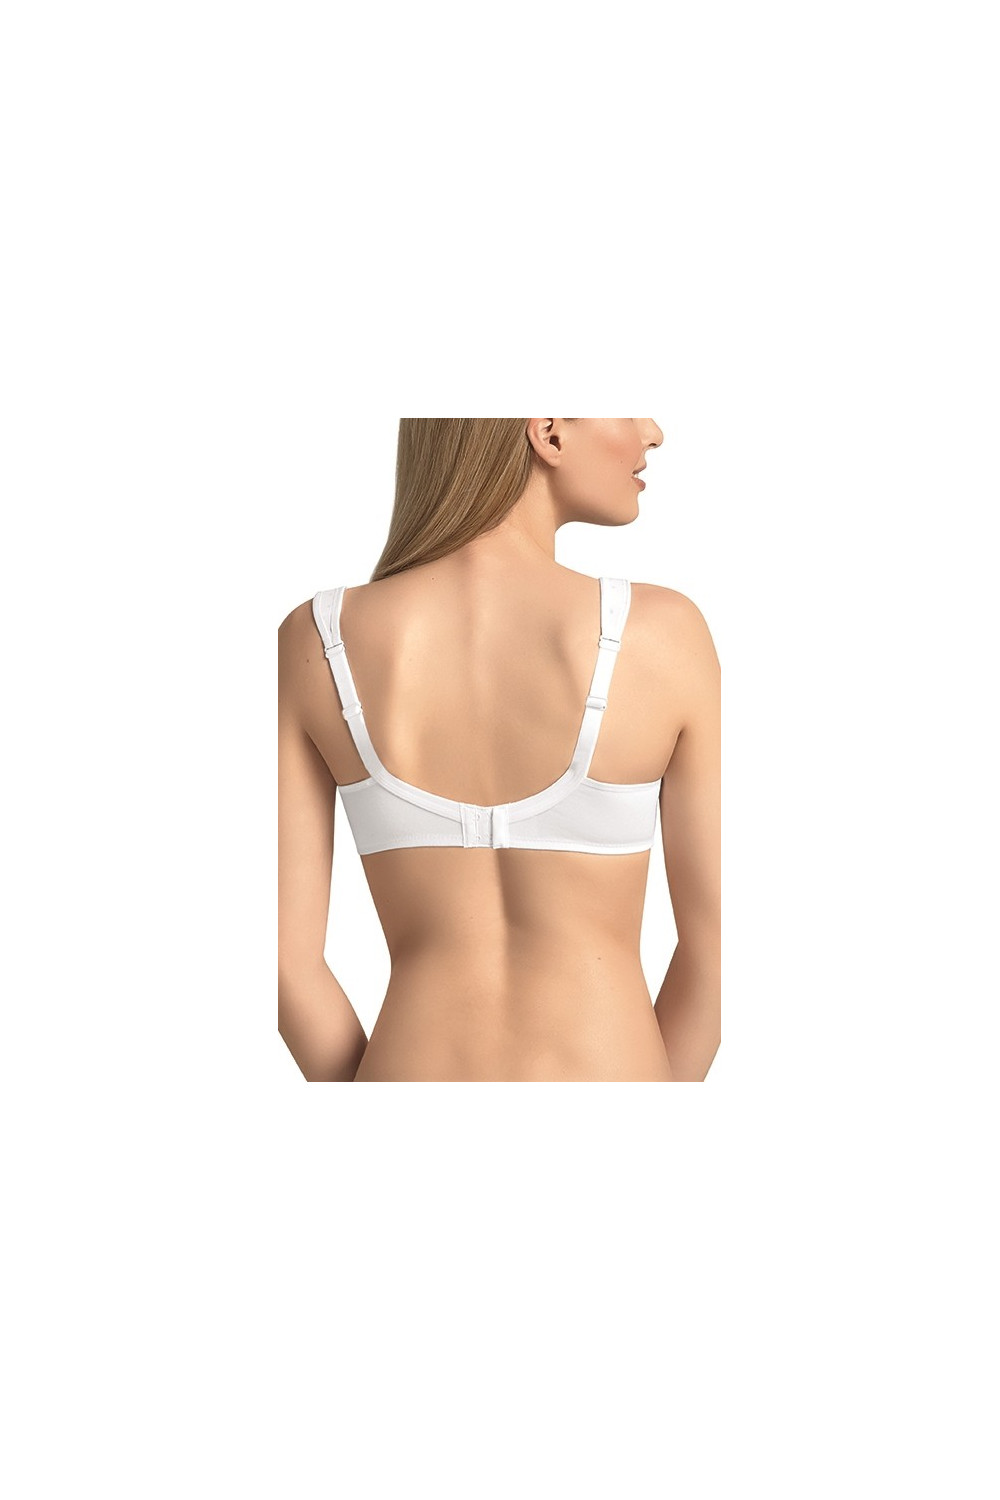 Cotton nursing bra with soft underwire that does not press the